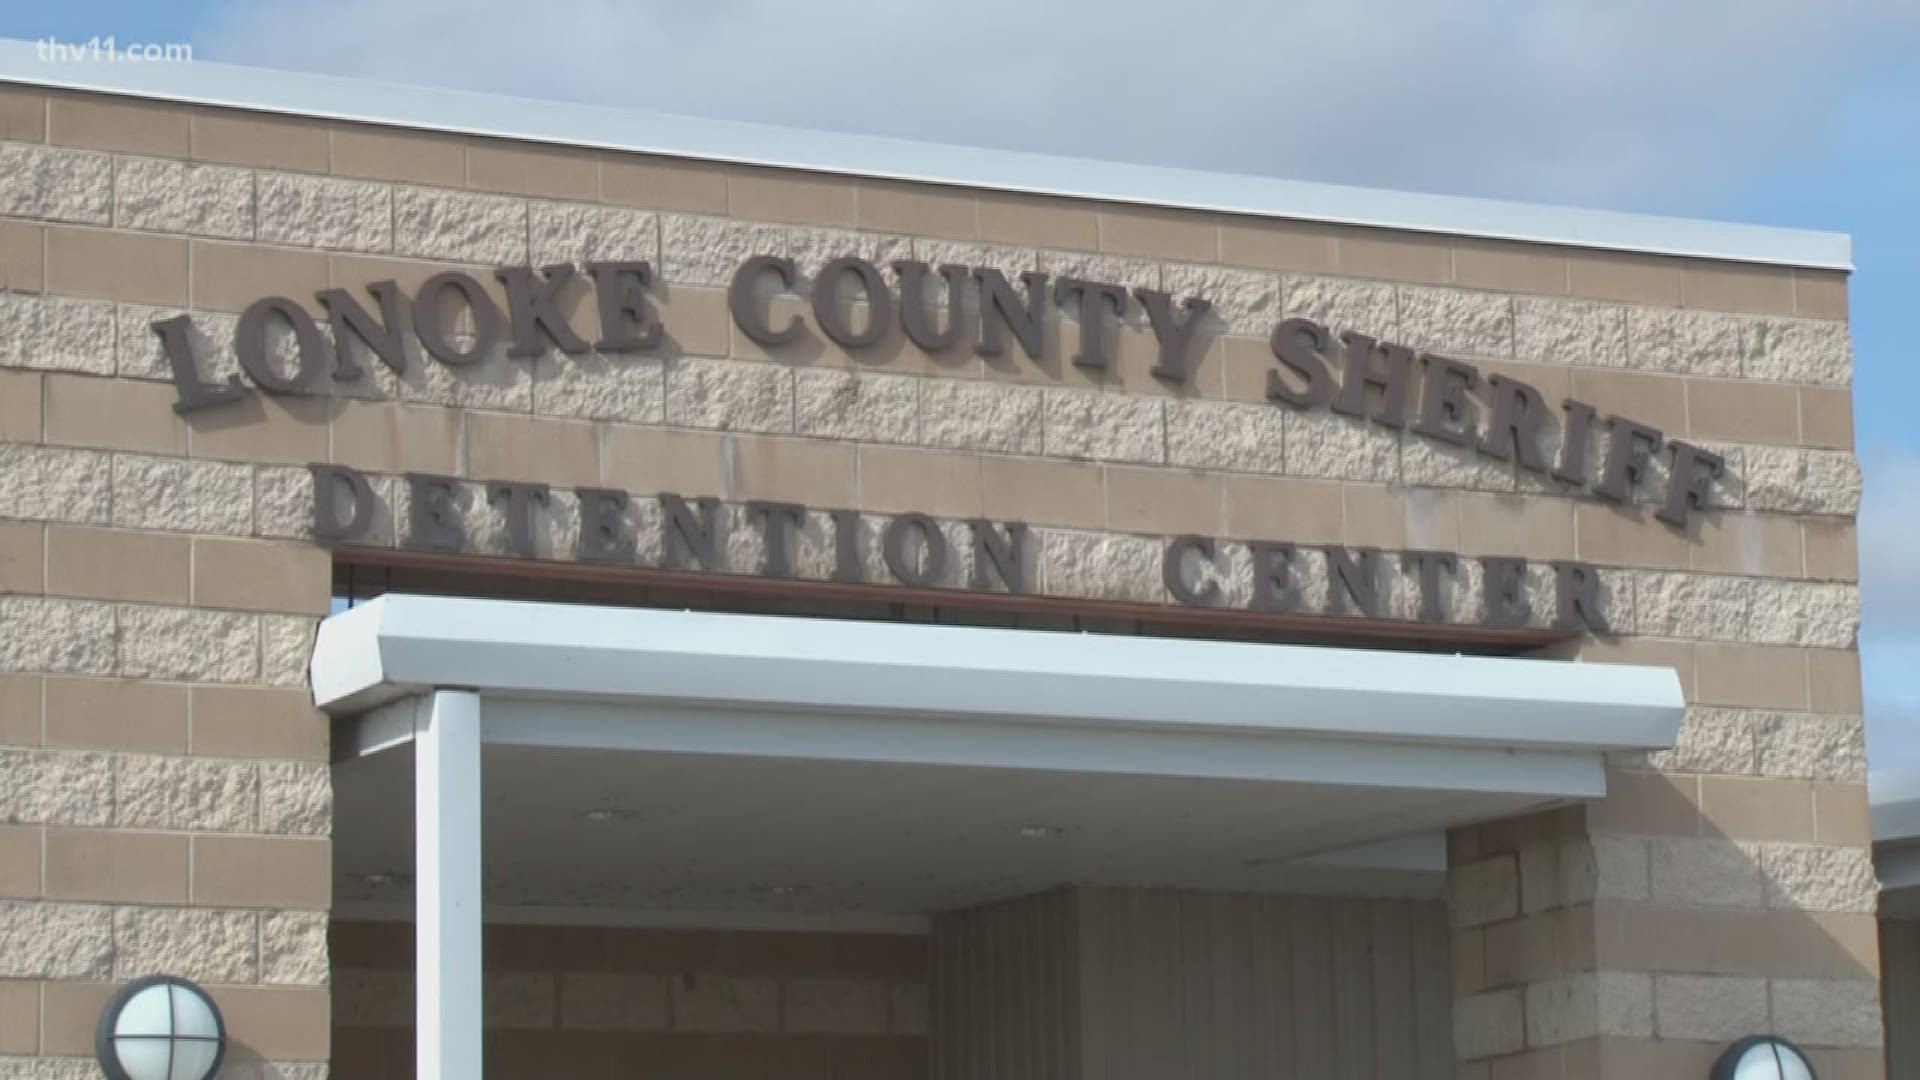 The Lonoke County jail has received a grant to help inmates battling addiction.